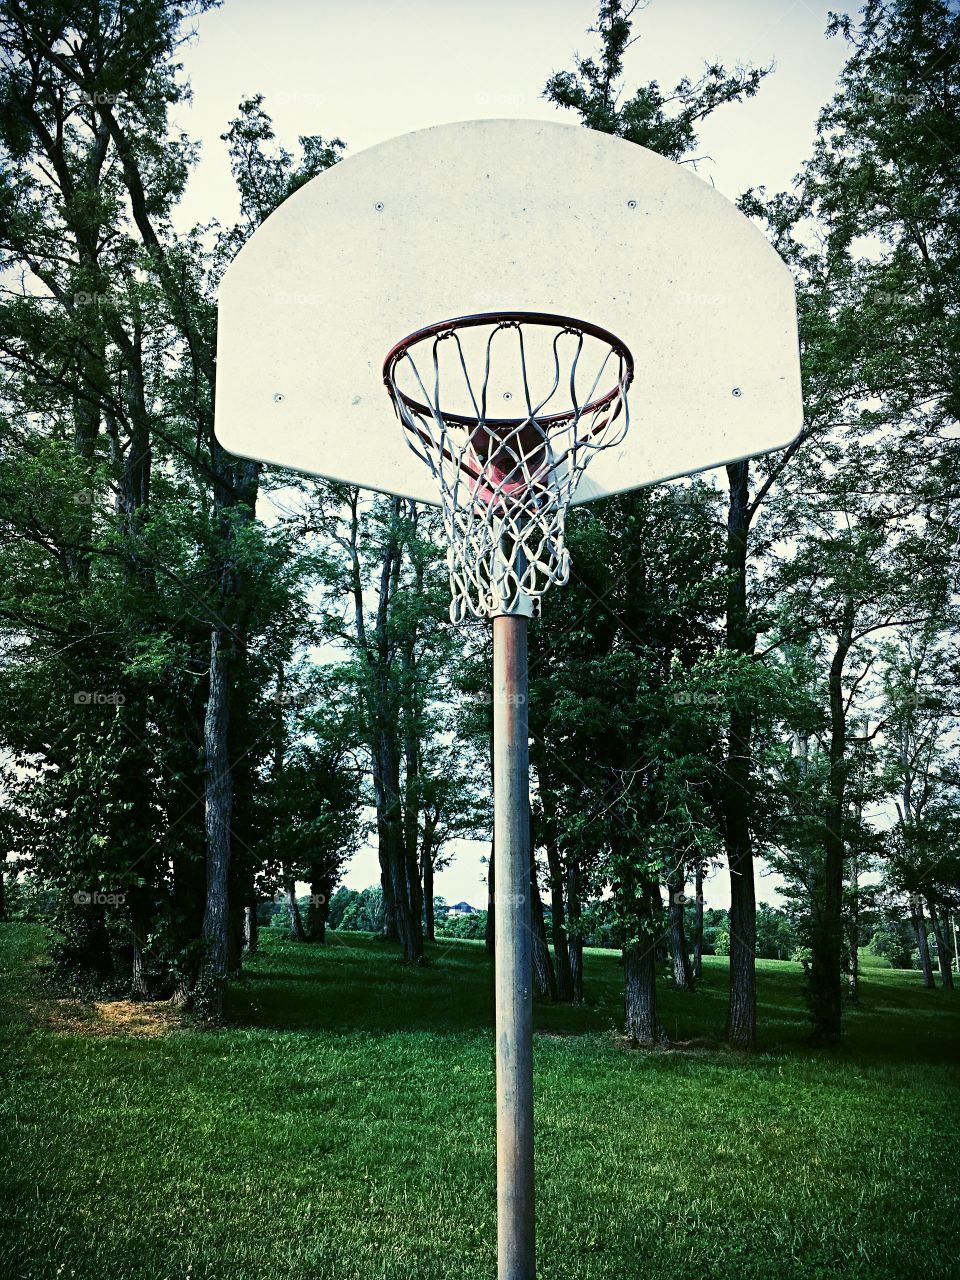 A rarely used basketball hoop hidden in the trees at the park